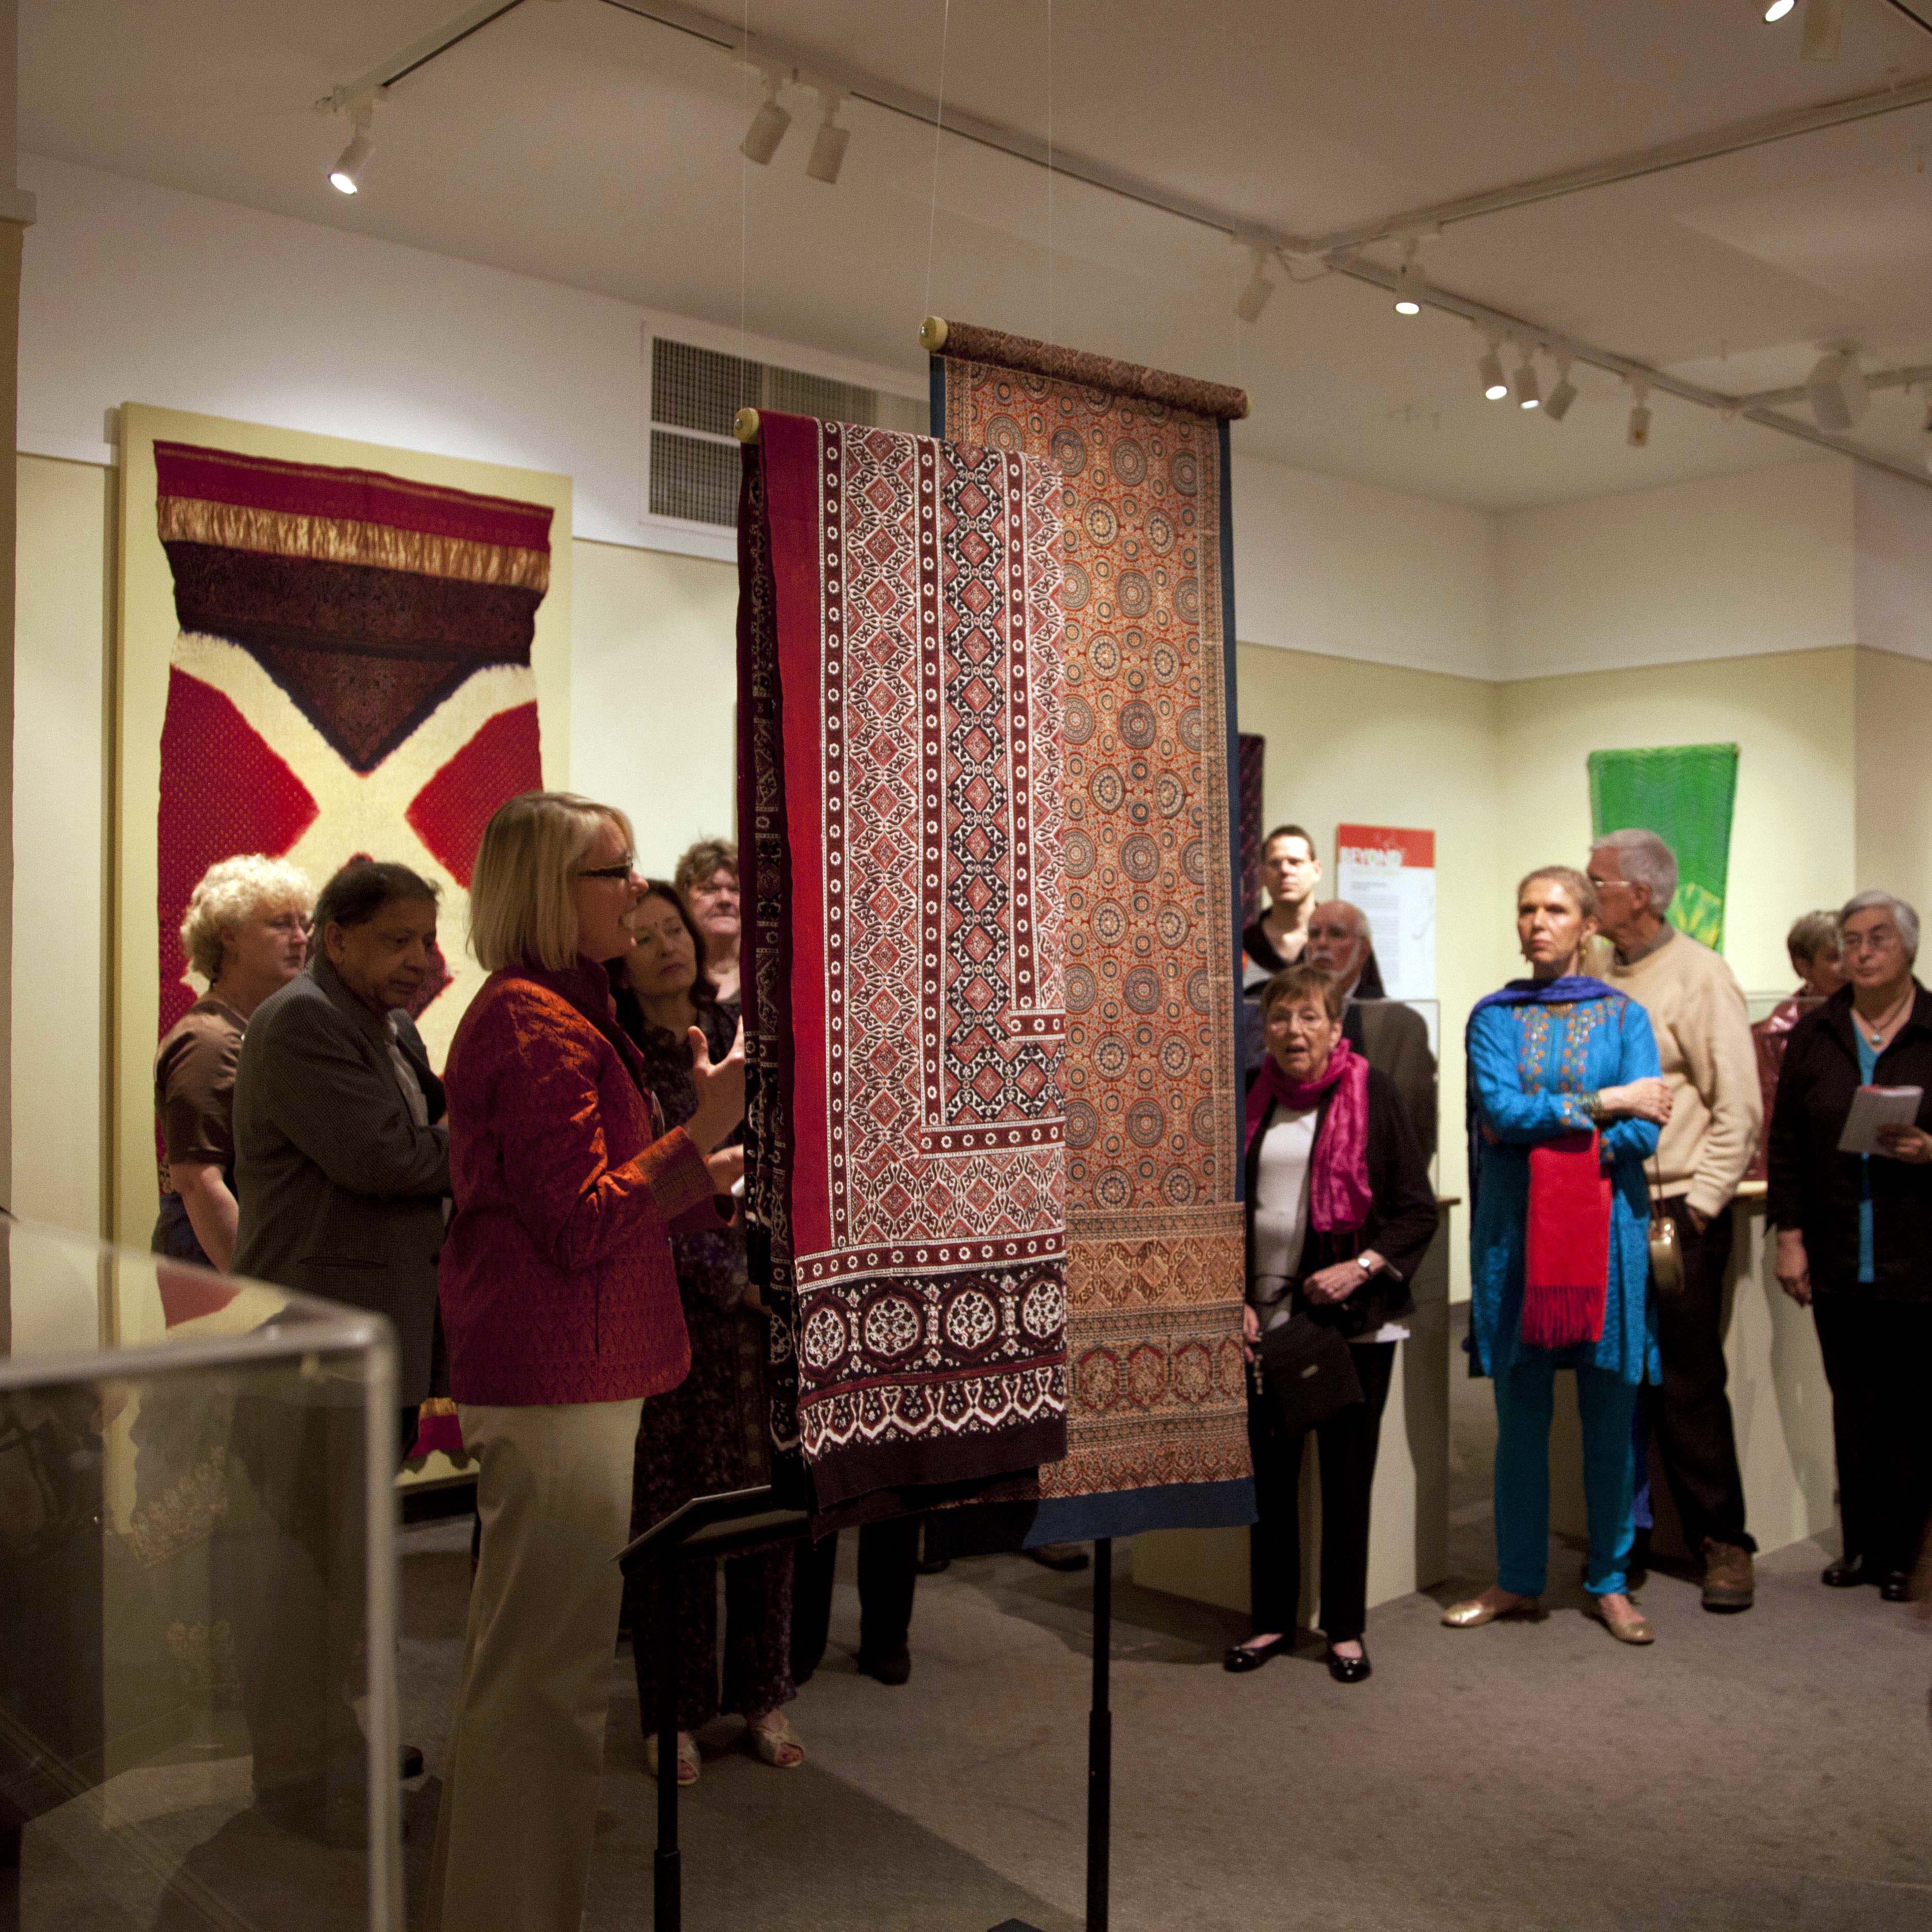 Beyond Peacocks and Paisleys: Handcrafted textiles of India and its neighbors with textiles on view and people milling about